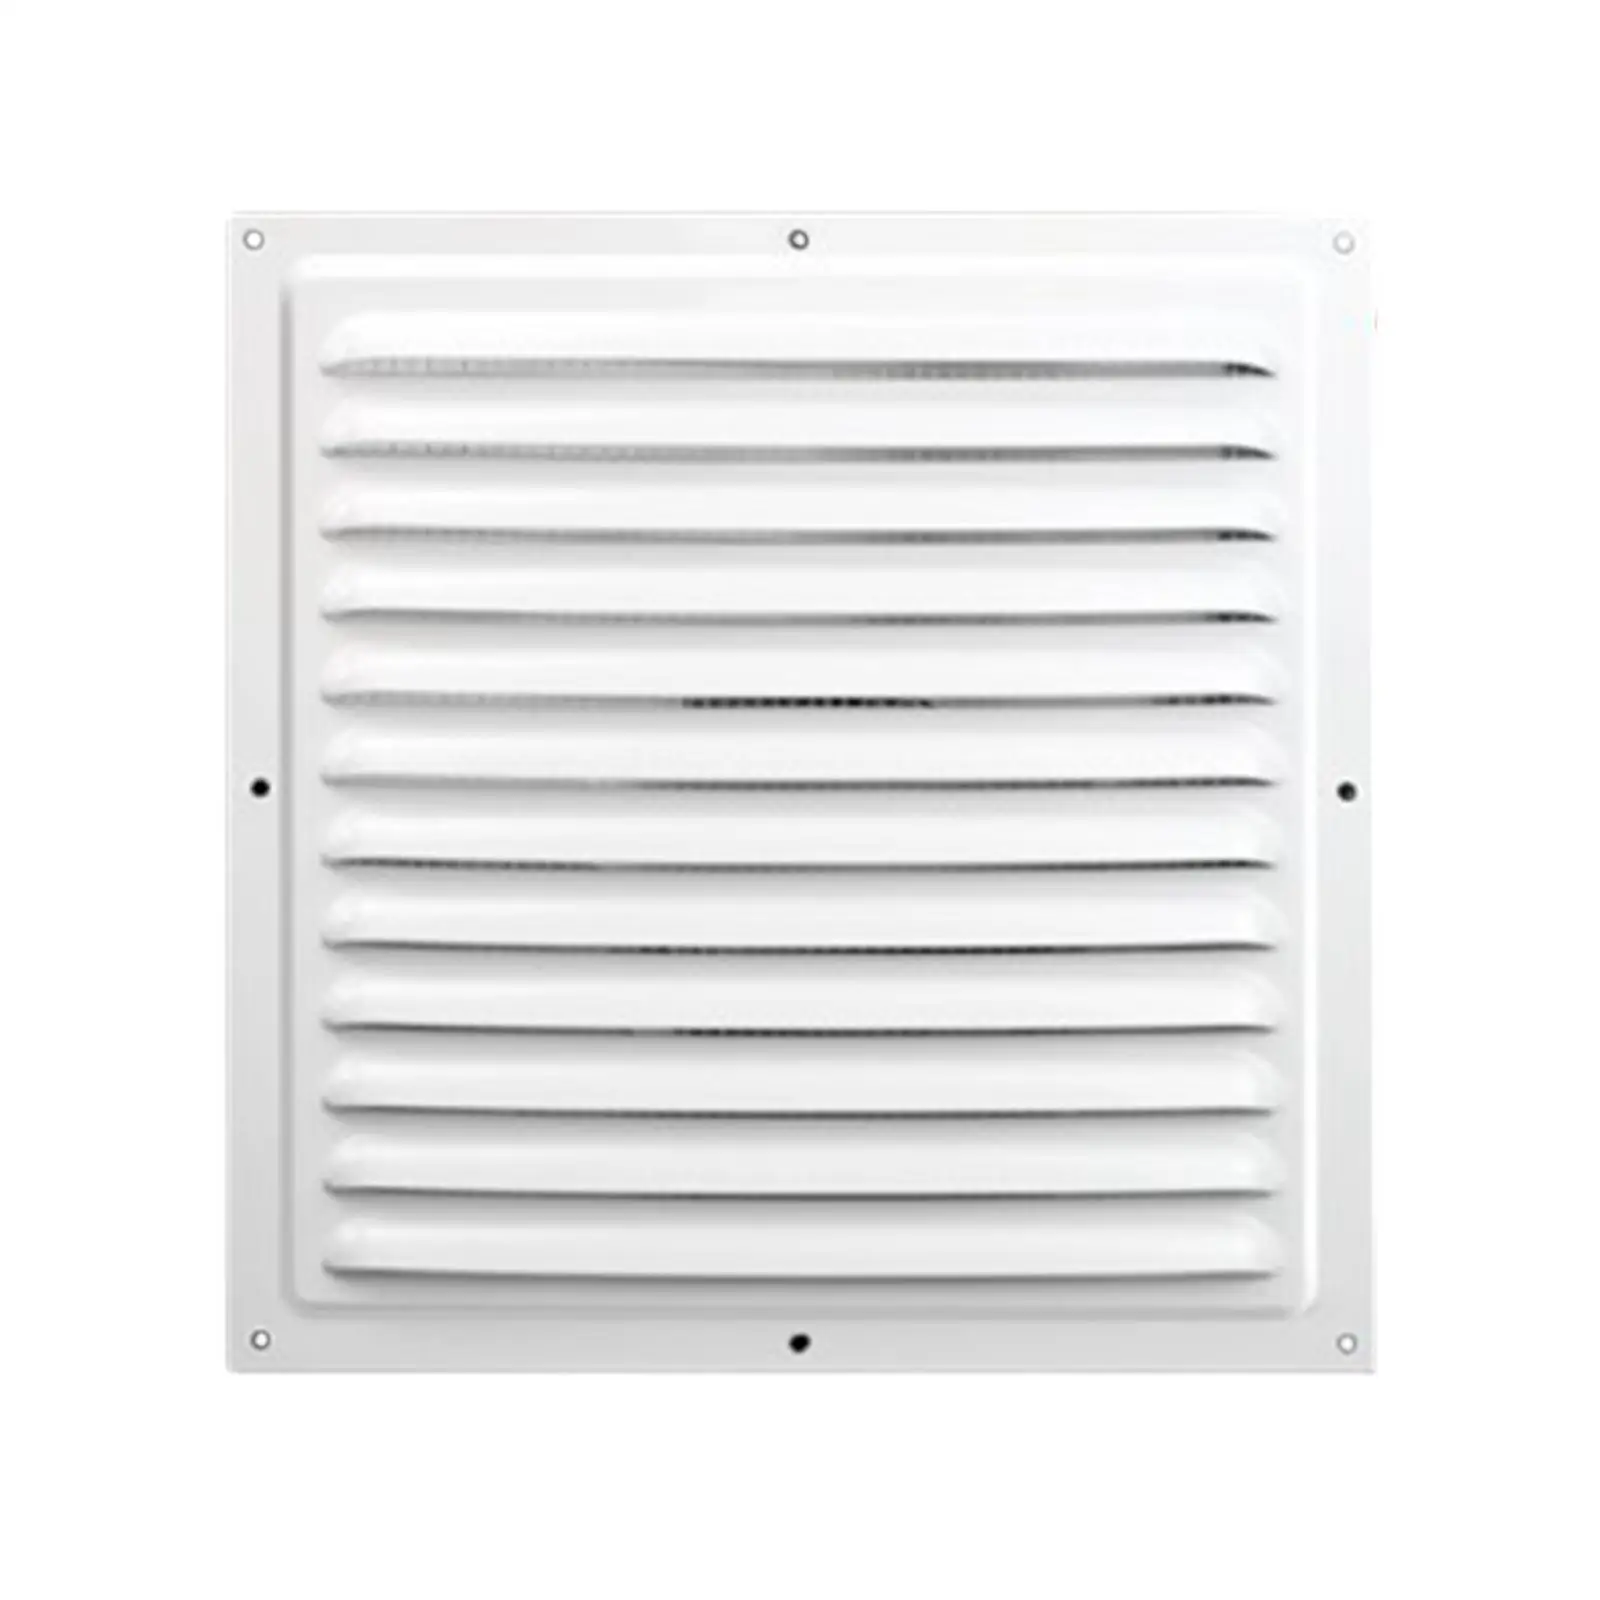 Air Vent Cover Square Air Return Grill Cover for Wall Ceiling Campers